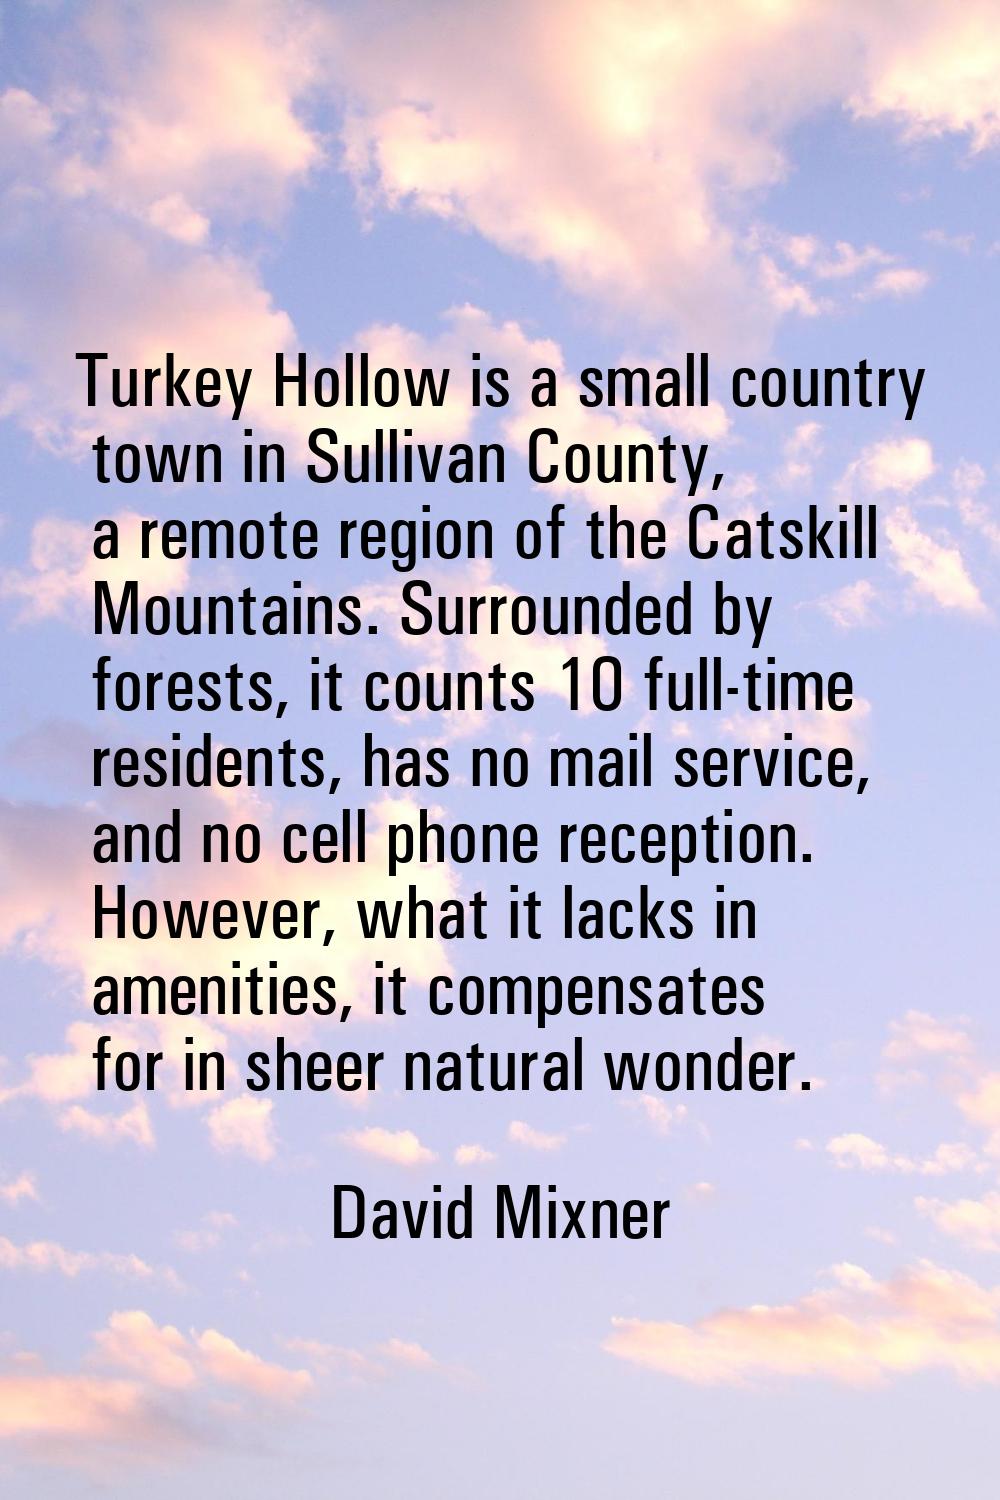 Turkey Hollow is a small country town in Sullivan County, a remote region of the Catskill Mountains